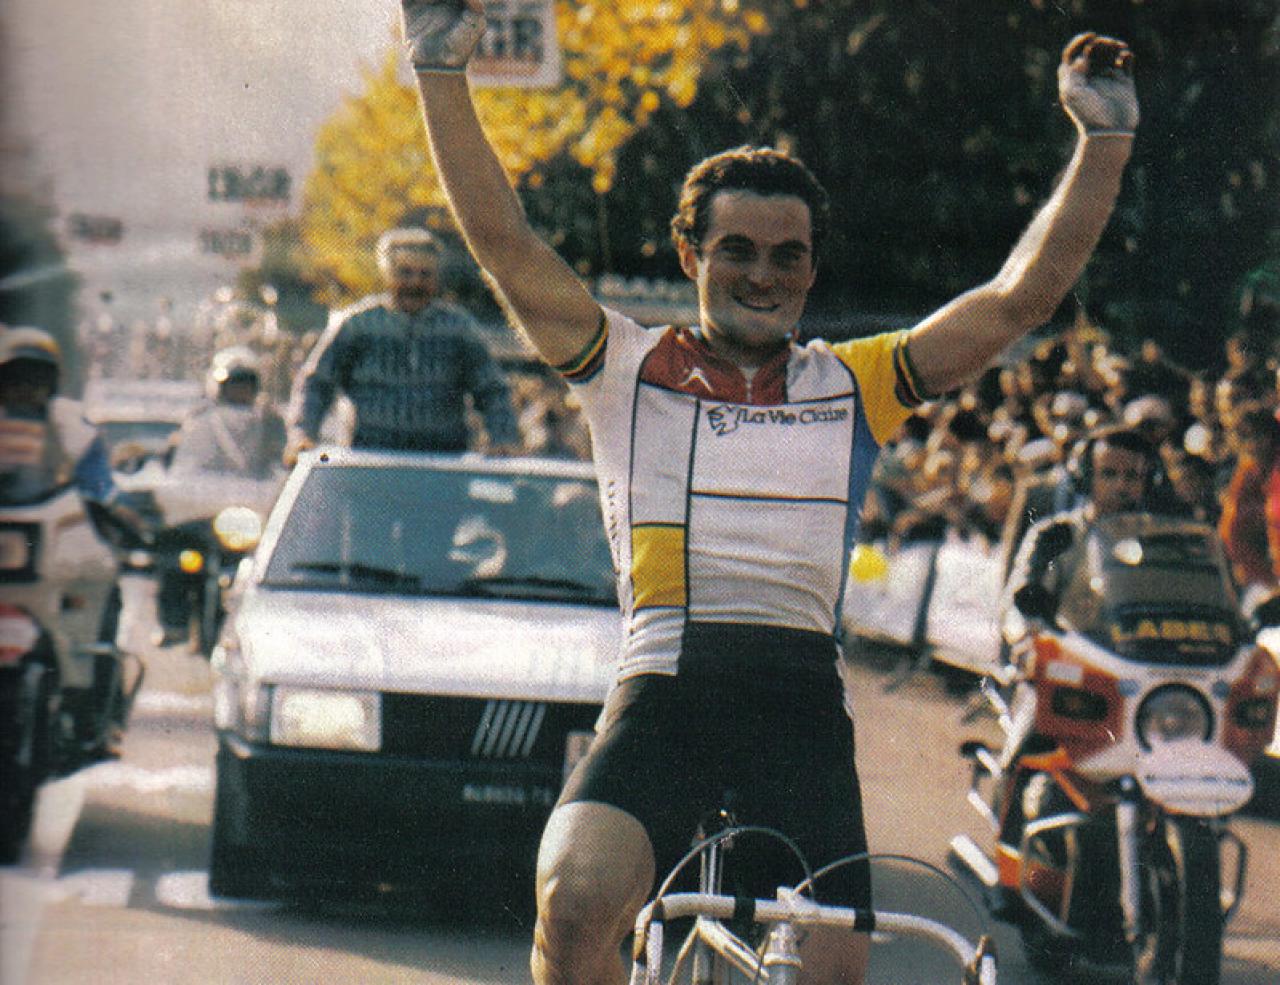 Full Kit Ranker The Winner The Story Of La Vie Claire S Classic Jersey Voted The Greatest Of All Time Road Cc